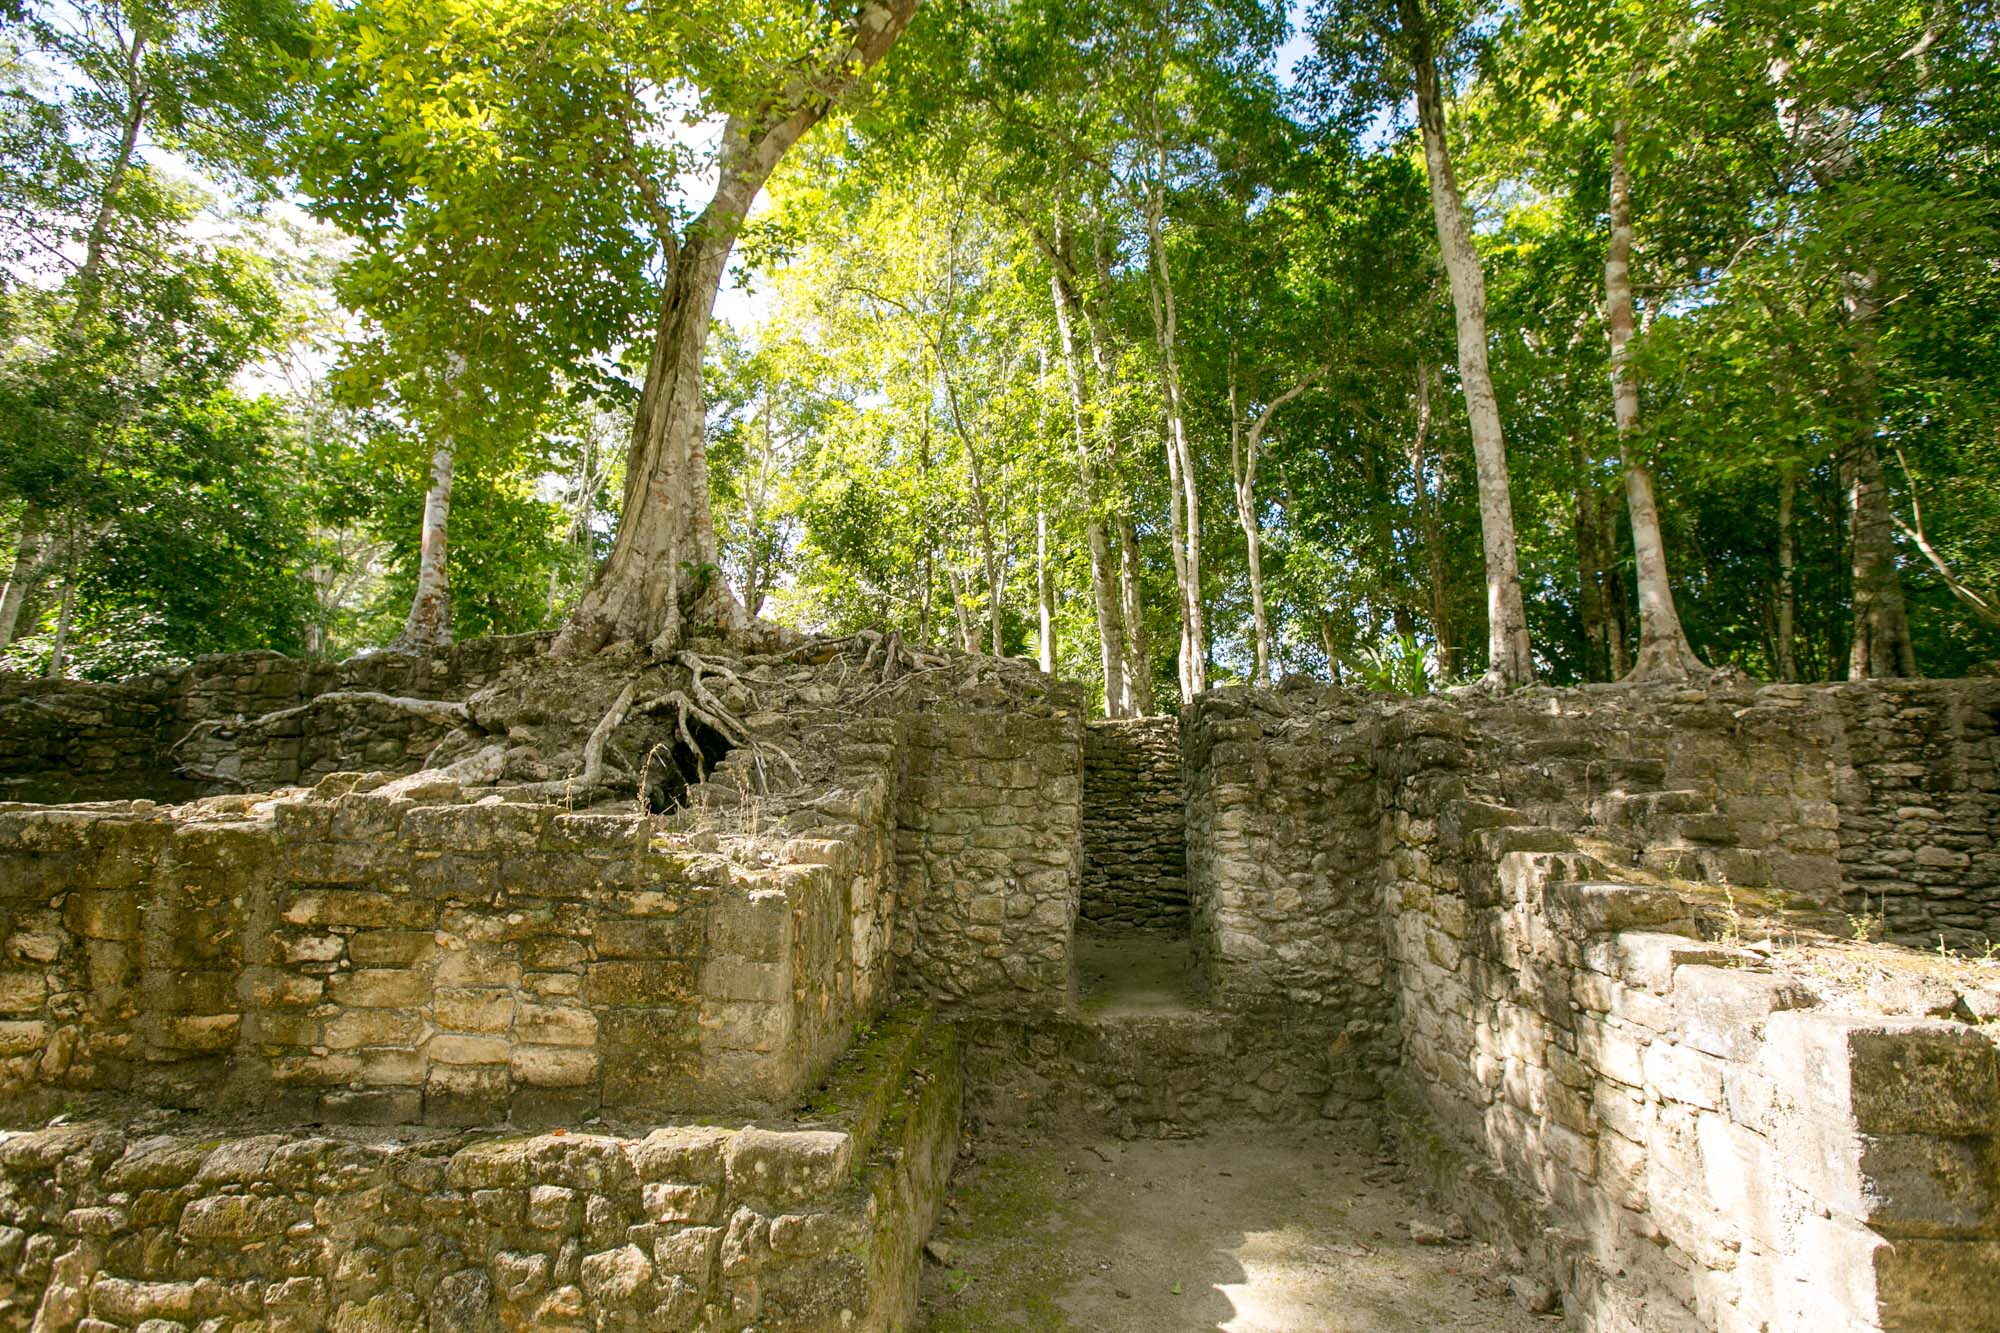 Trees and Mayan ruins at Dzibanche in Mexico